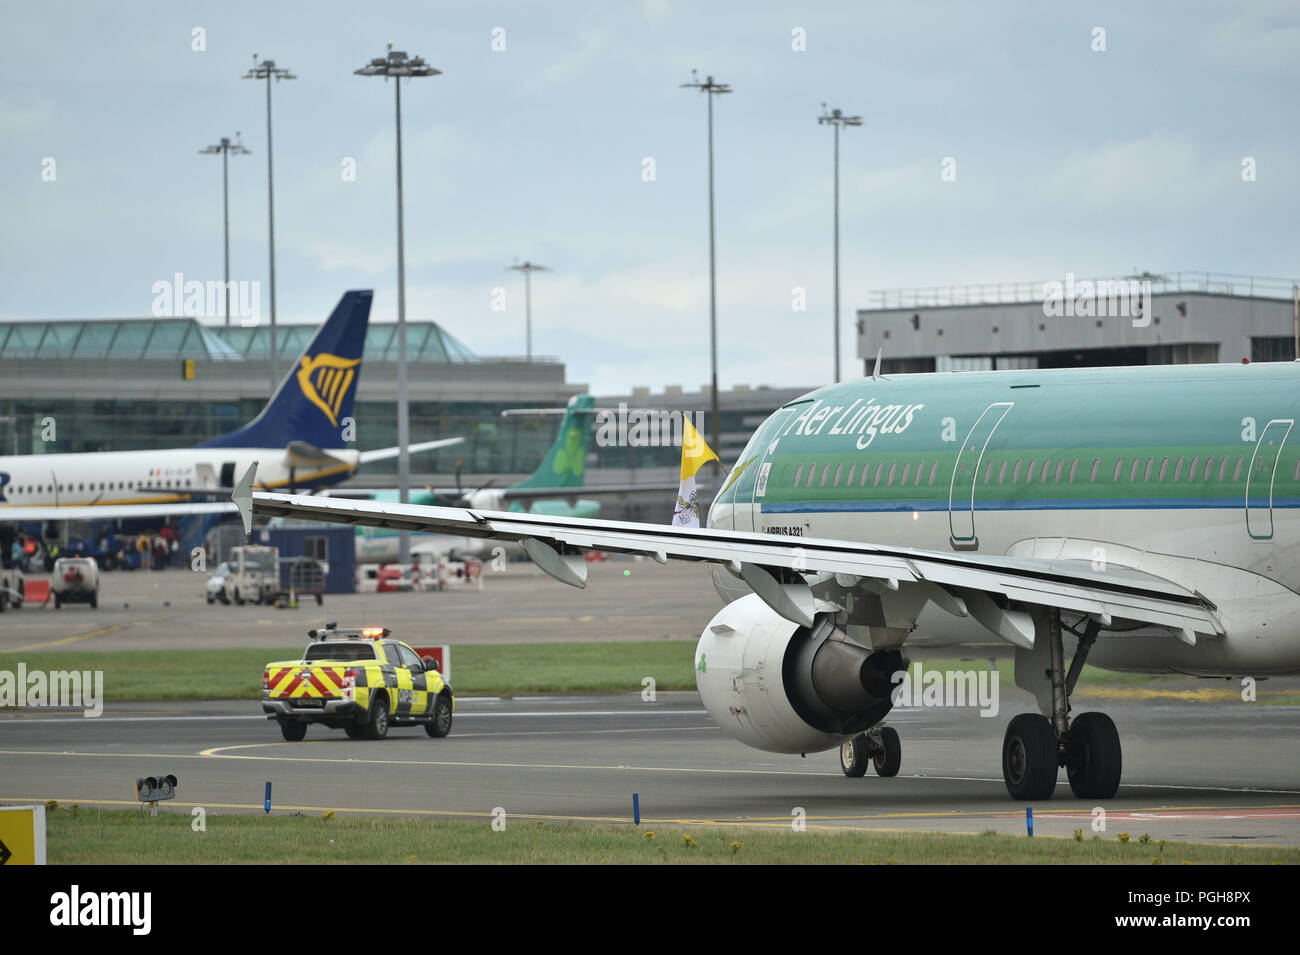 The plane carrying Pope Francis taxis at Dublin International Airport, as he heads back to Rome, Italy, following his visit to Ireland. Stock Photo